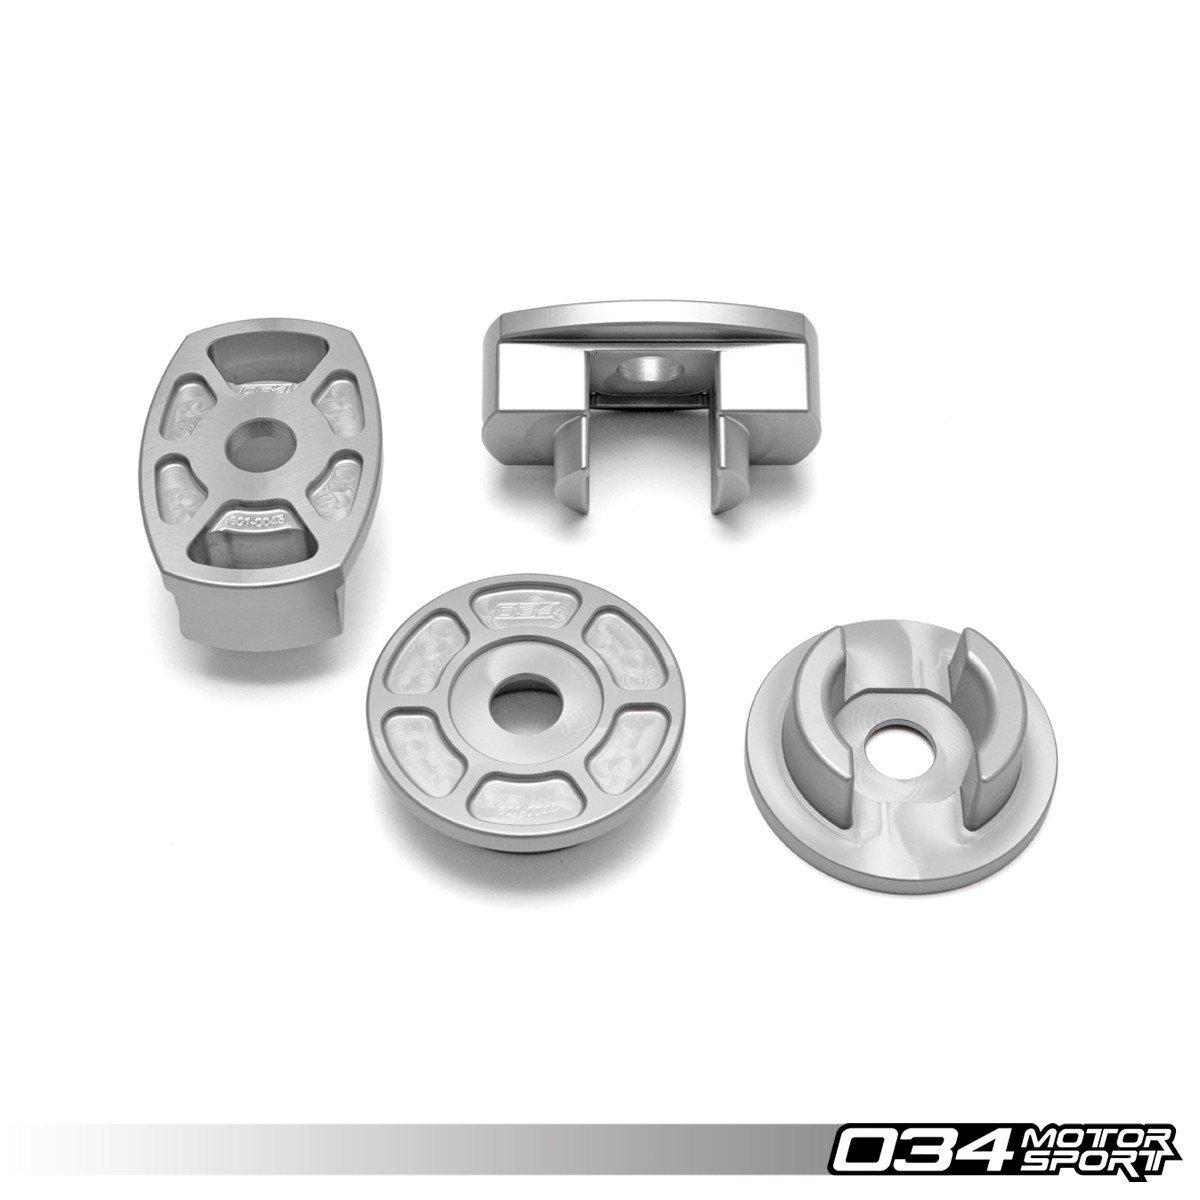 Billet Aluminum Rear Subframe Mount Insert Kit, B9 Audi A4/S4/A5/S5/RS5 & Allroad-A Little Tuning Co